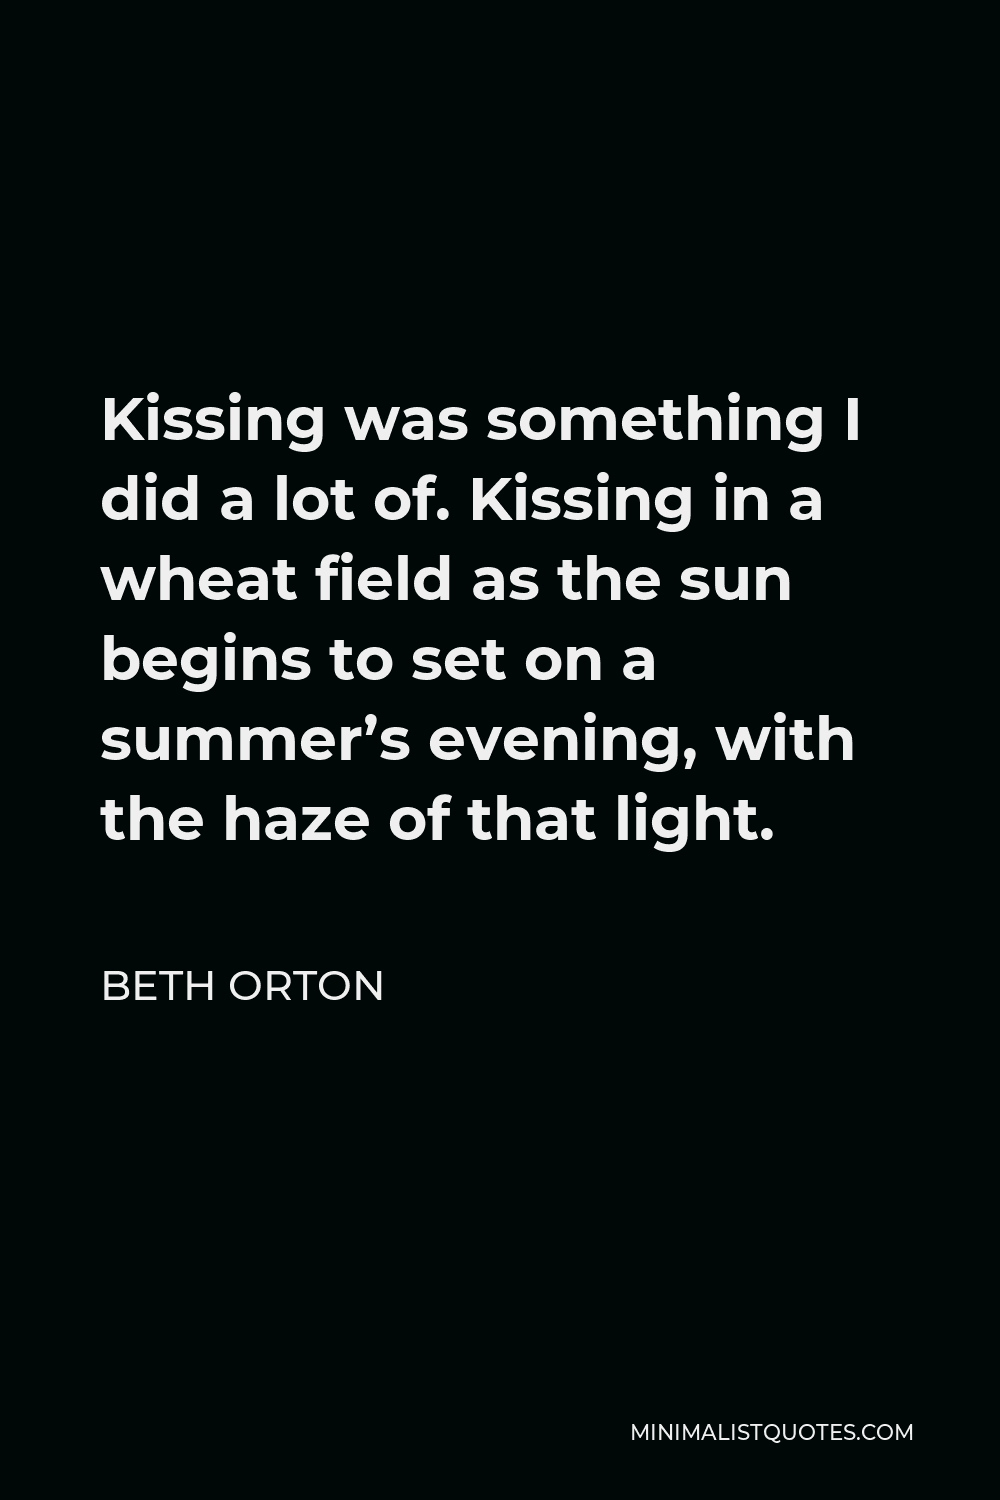 Beth Orton Quote - Kissing was something I did a lot of. Kissing in a wheat field as the sun begins to set on a summer’s evening, with the haze of that light.